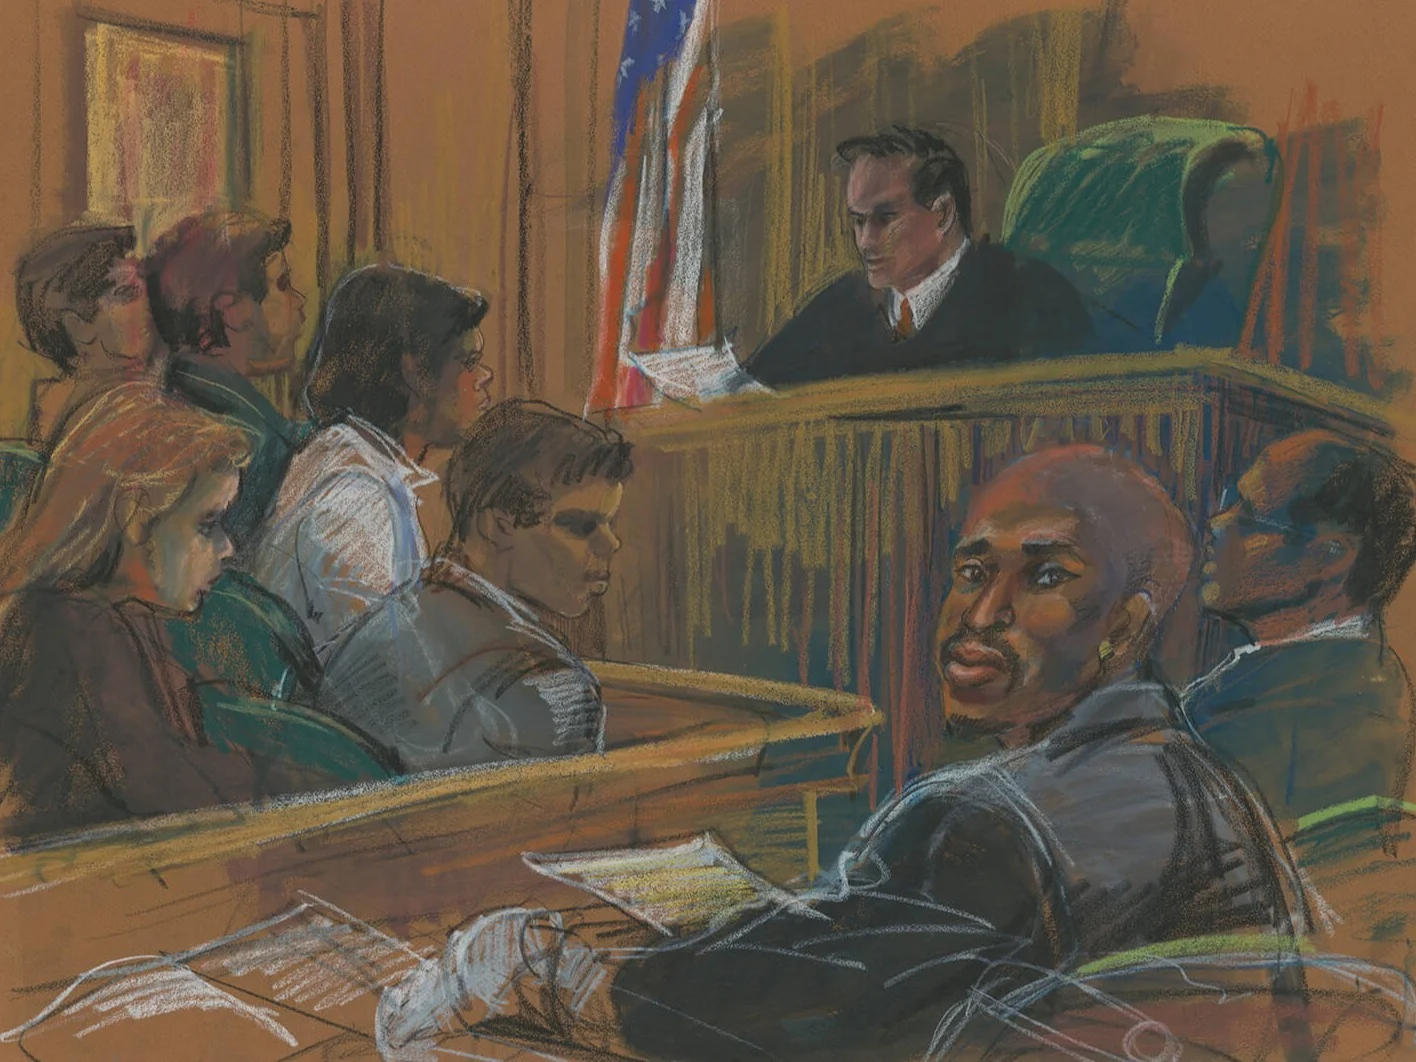 Tupac Shakur trial, 1995. Image courtesy Marilyn Church / Library of Congress, Prints & Photographs Division